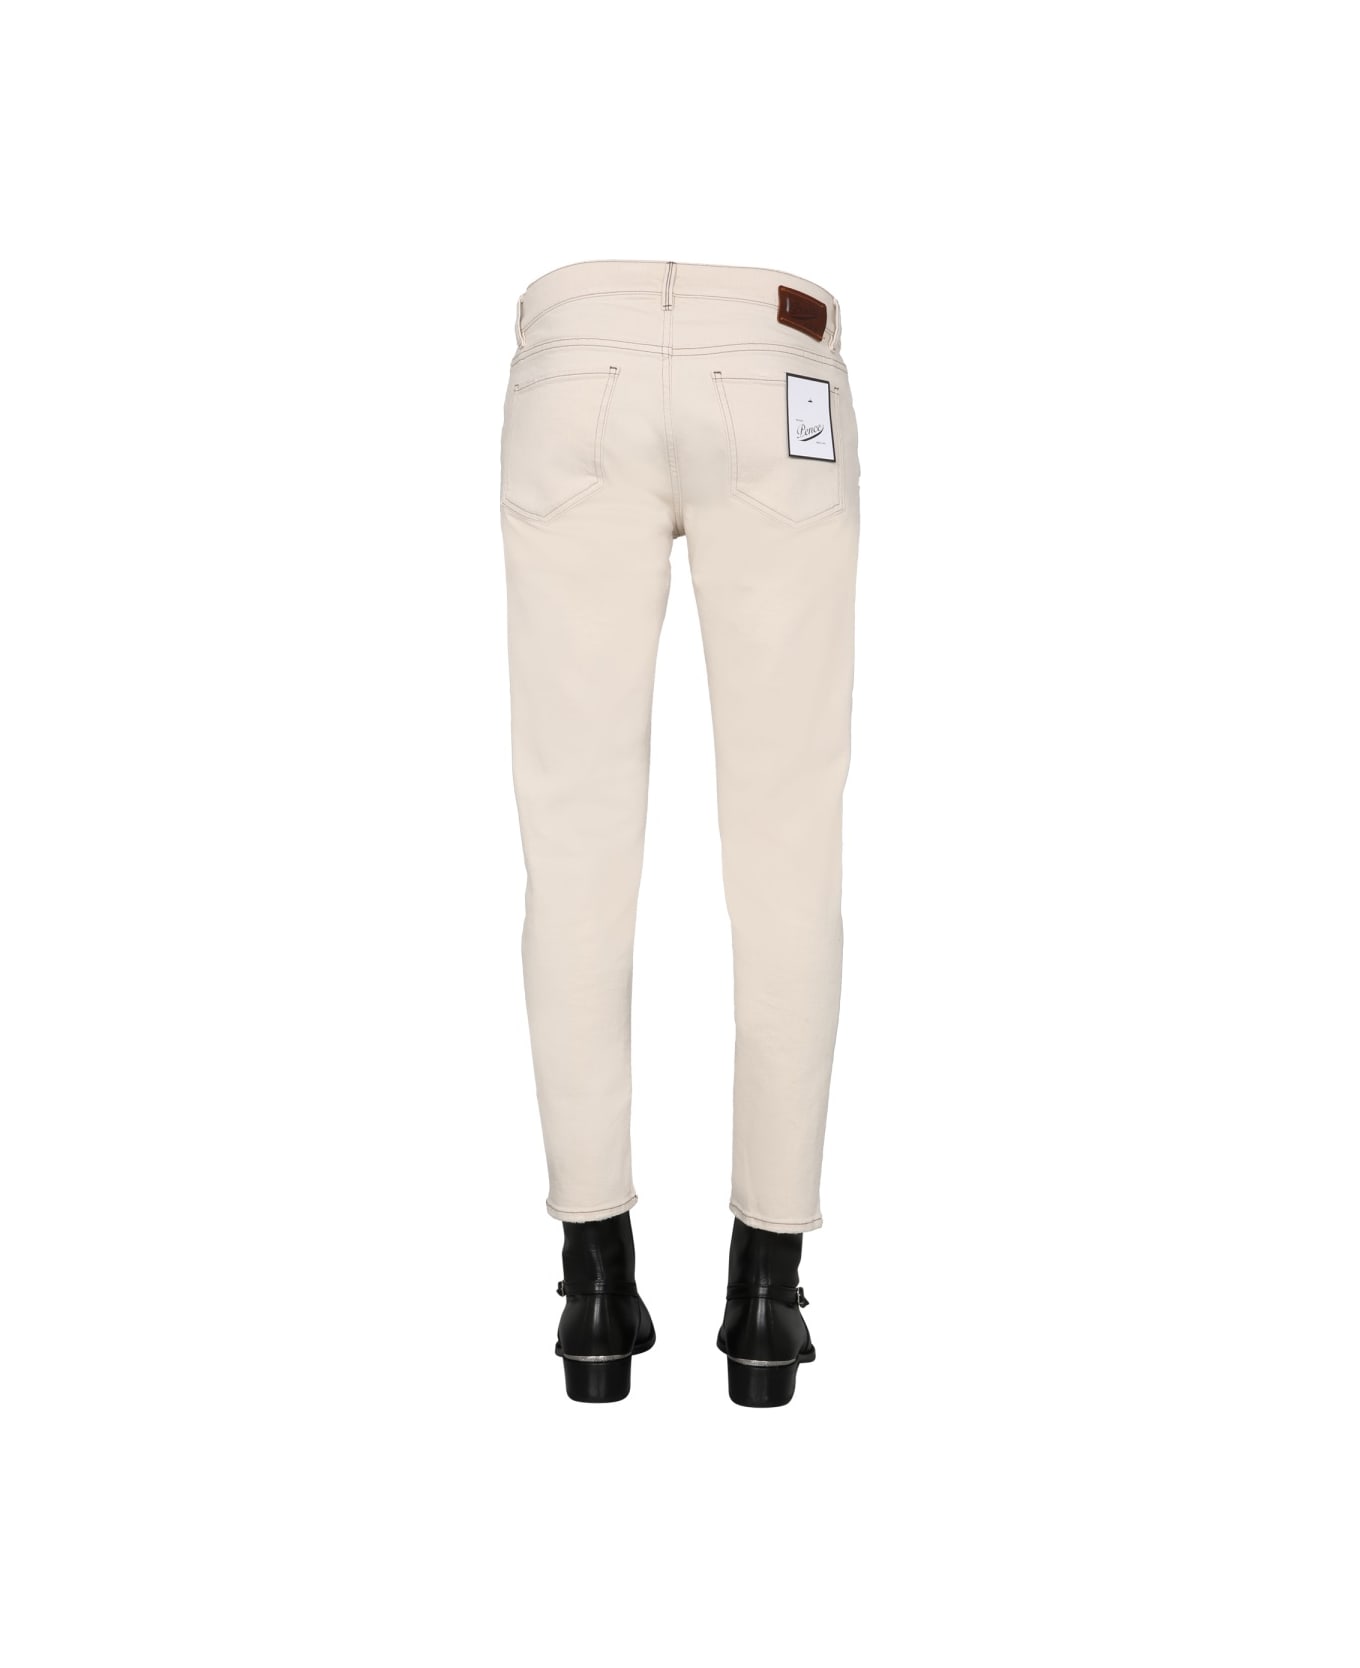 Pence "rico / Sc" Trousers - BEIGE